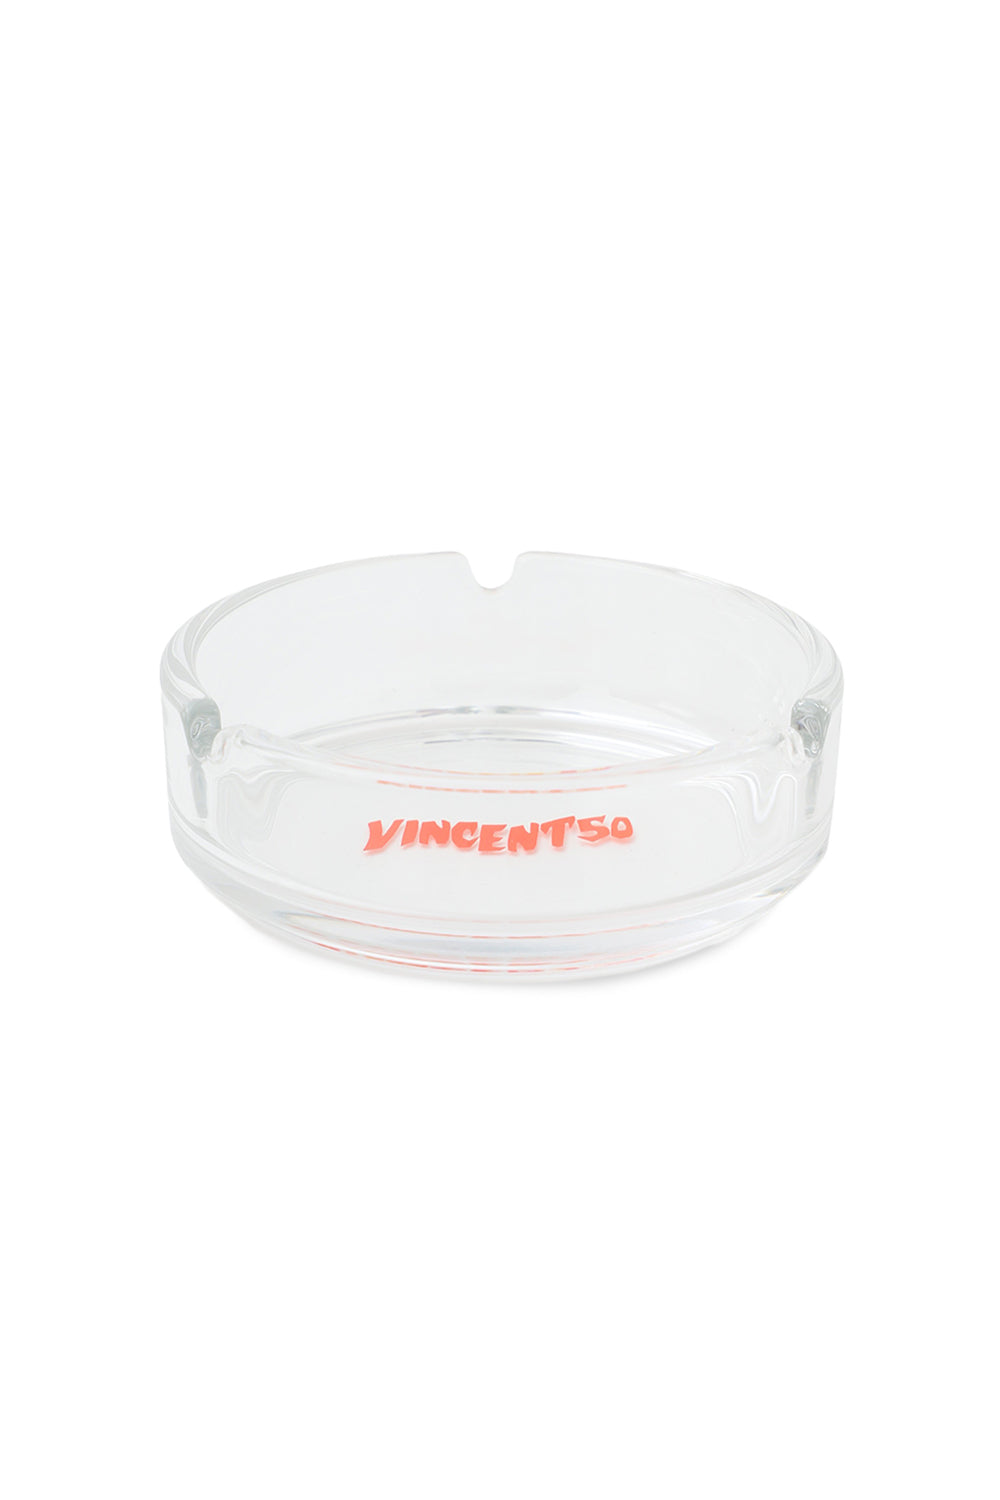 VINCENT50 Ashtray Red